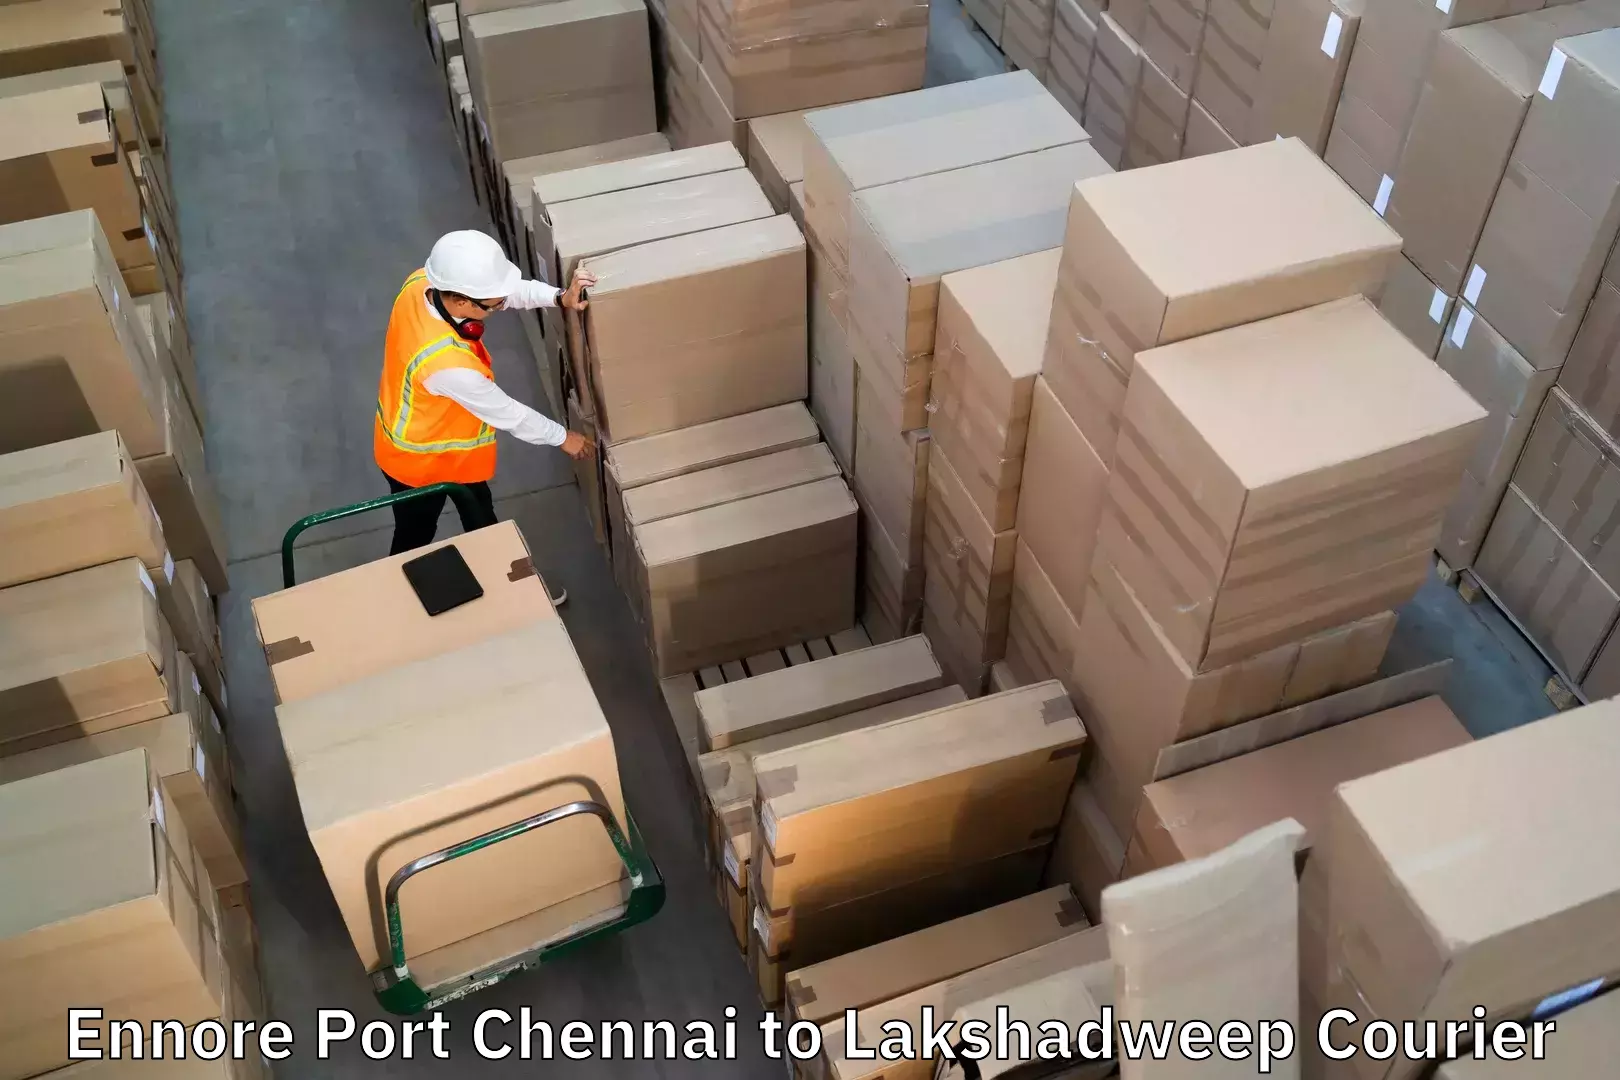 Luggage shipping logistics in Ennore Port Chennai to Lakshadweep